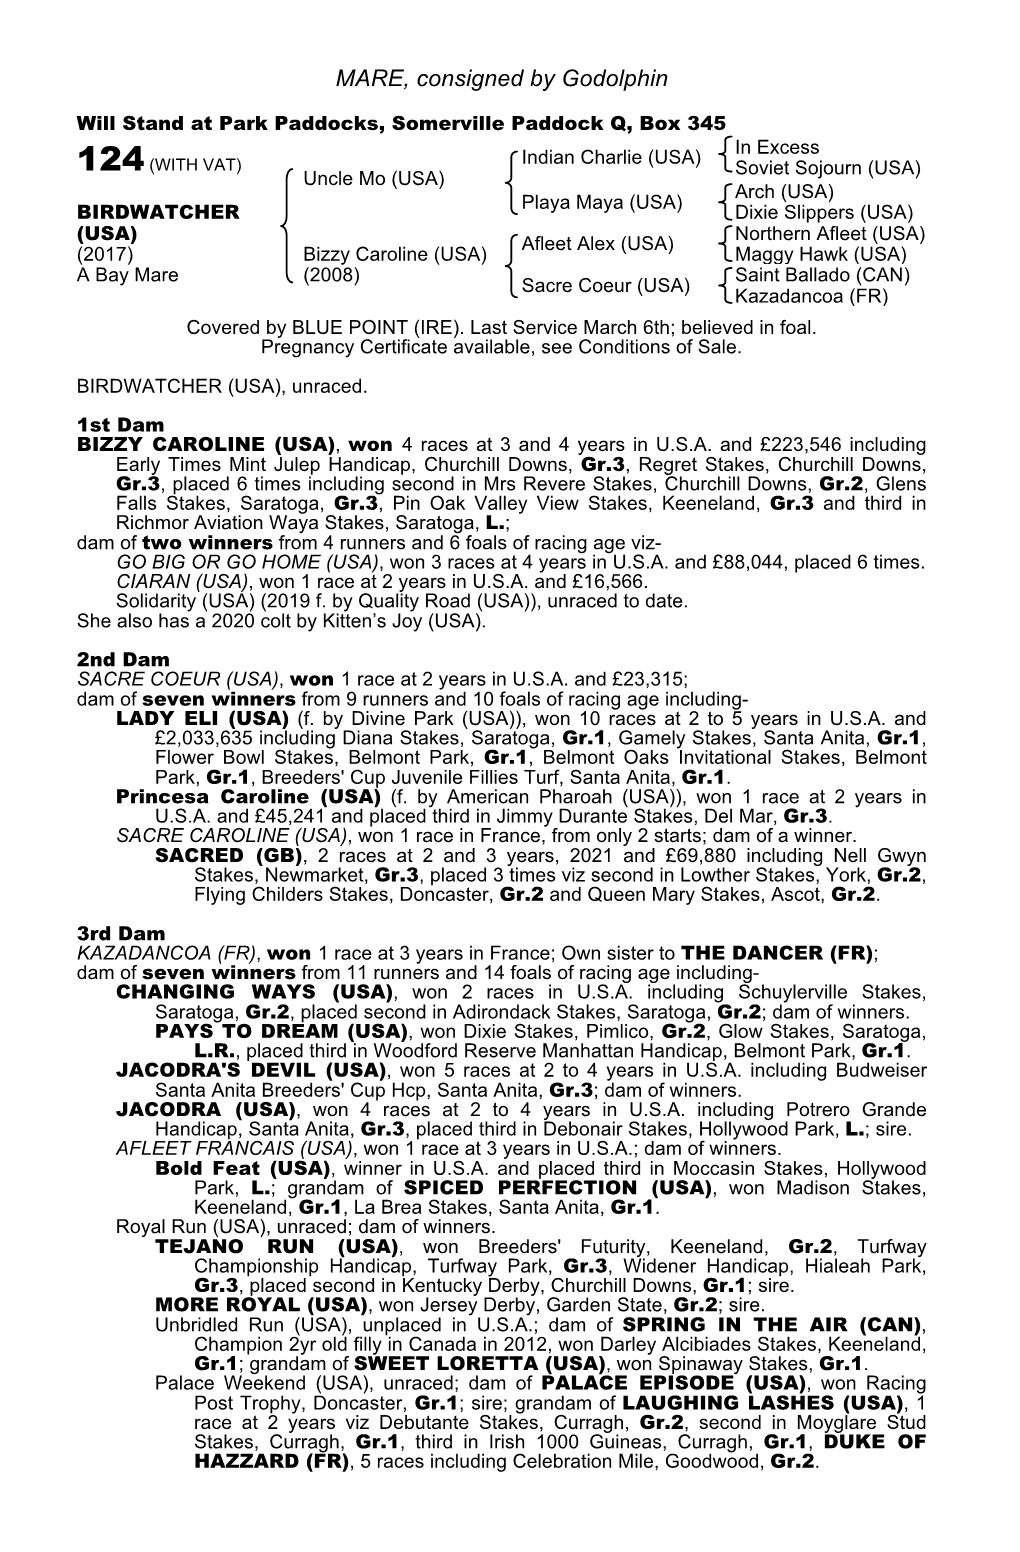 MARE, Consigned by Godolphin